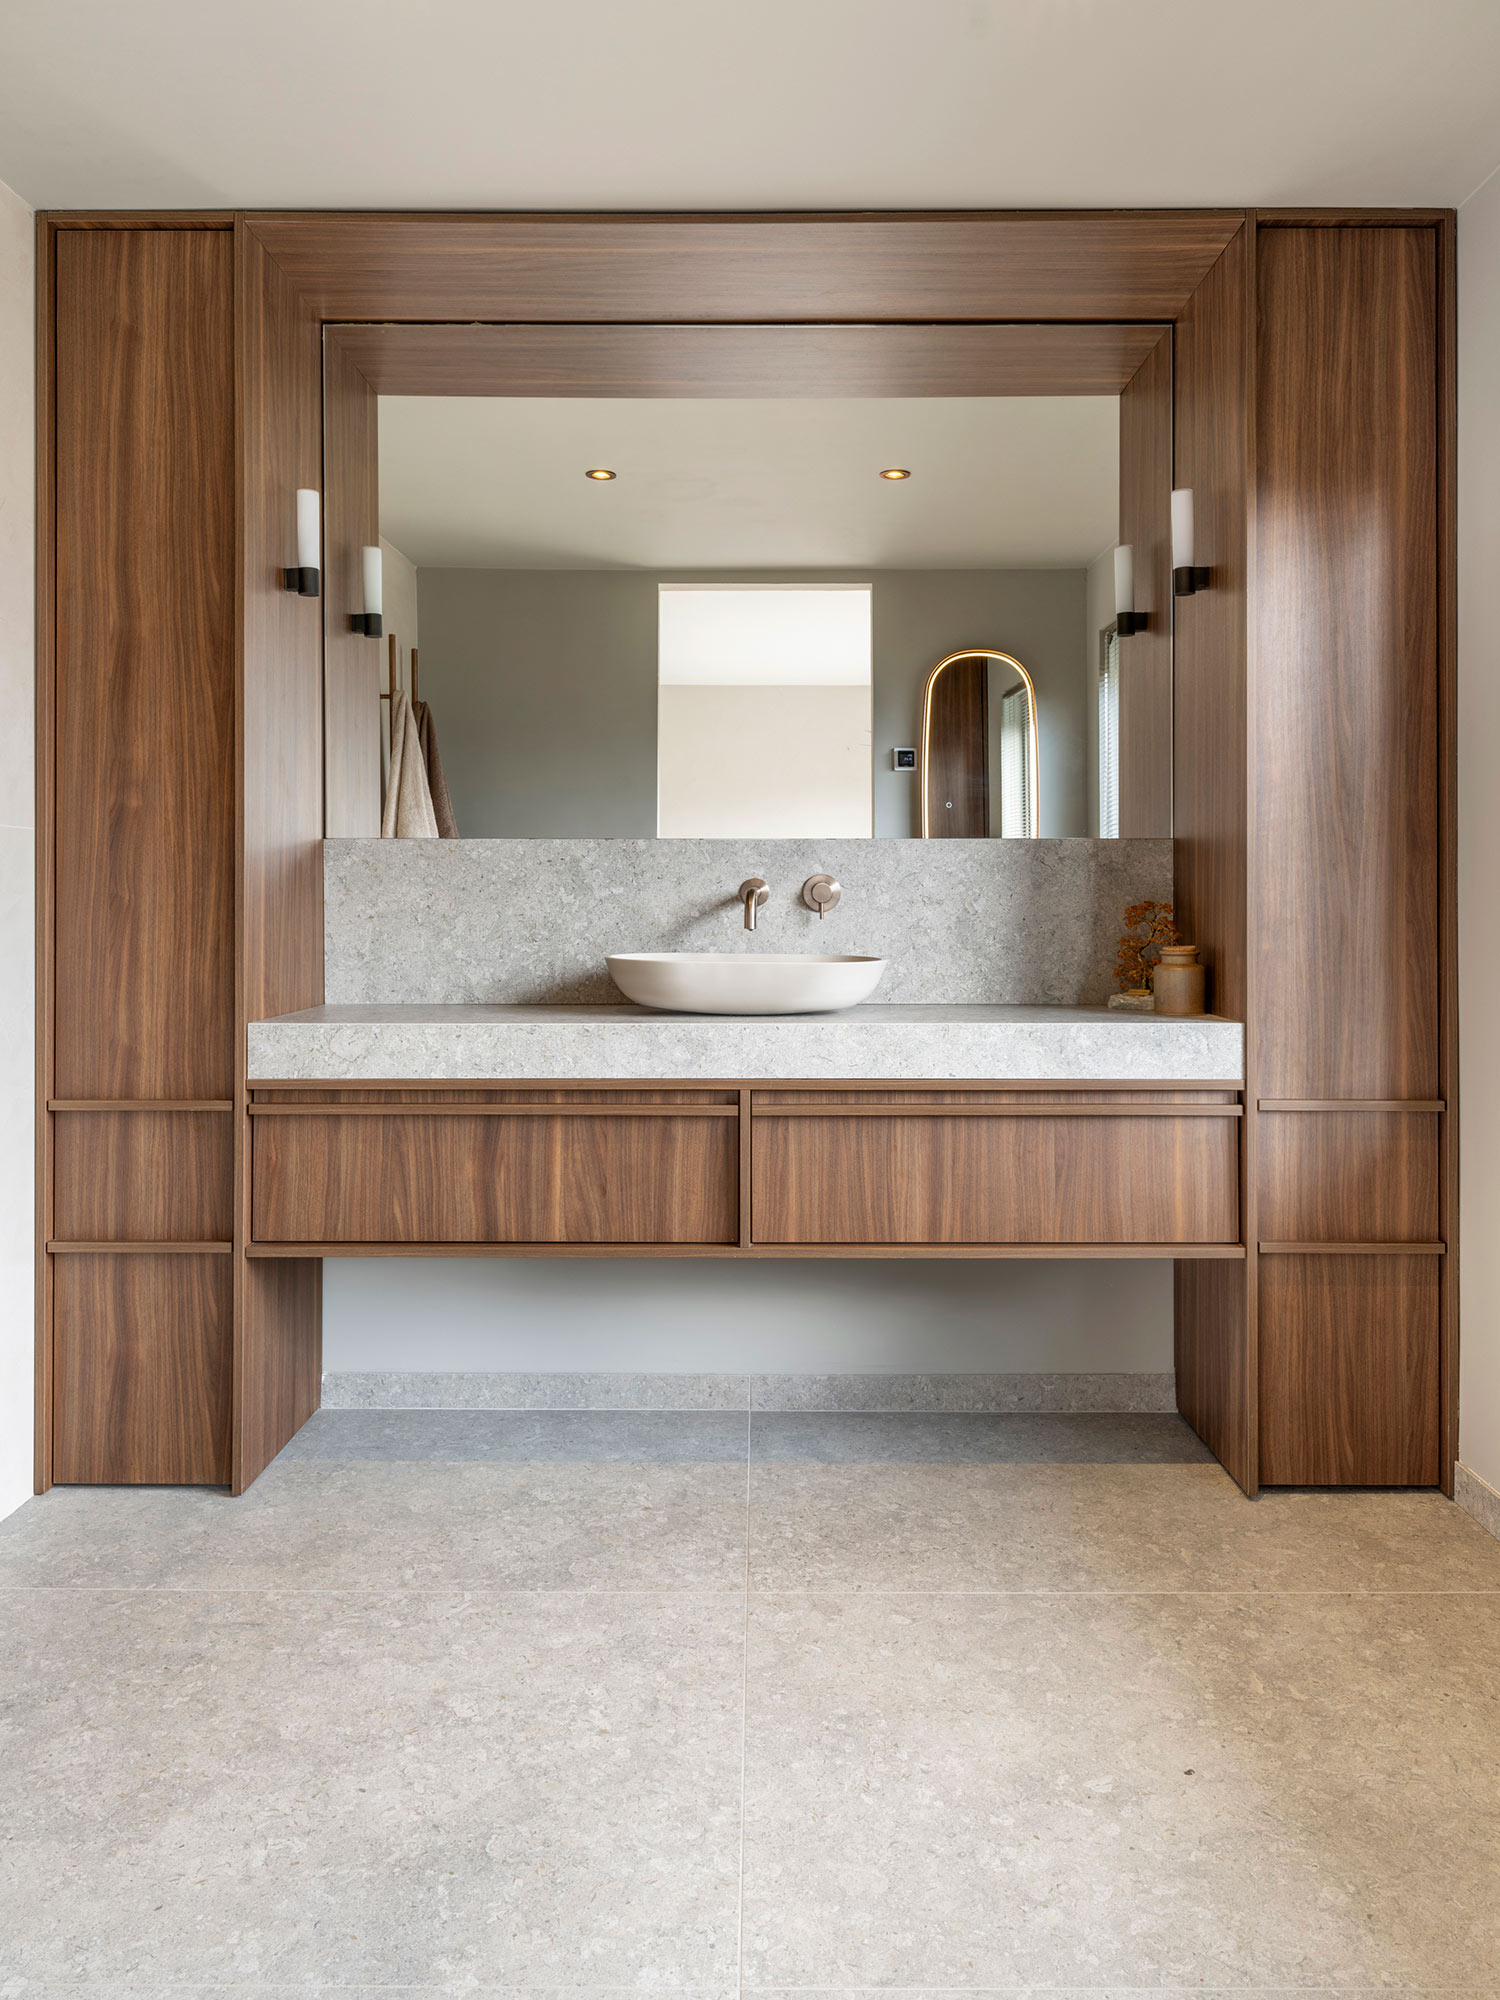 Image of Bathroom Kenisur 1 in The sophisticated and exclusive Scalea Equinox stone is a real eye-catcher in this opulent kitchen with dramatic tones - Cosentino